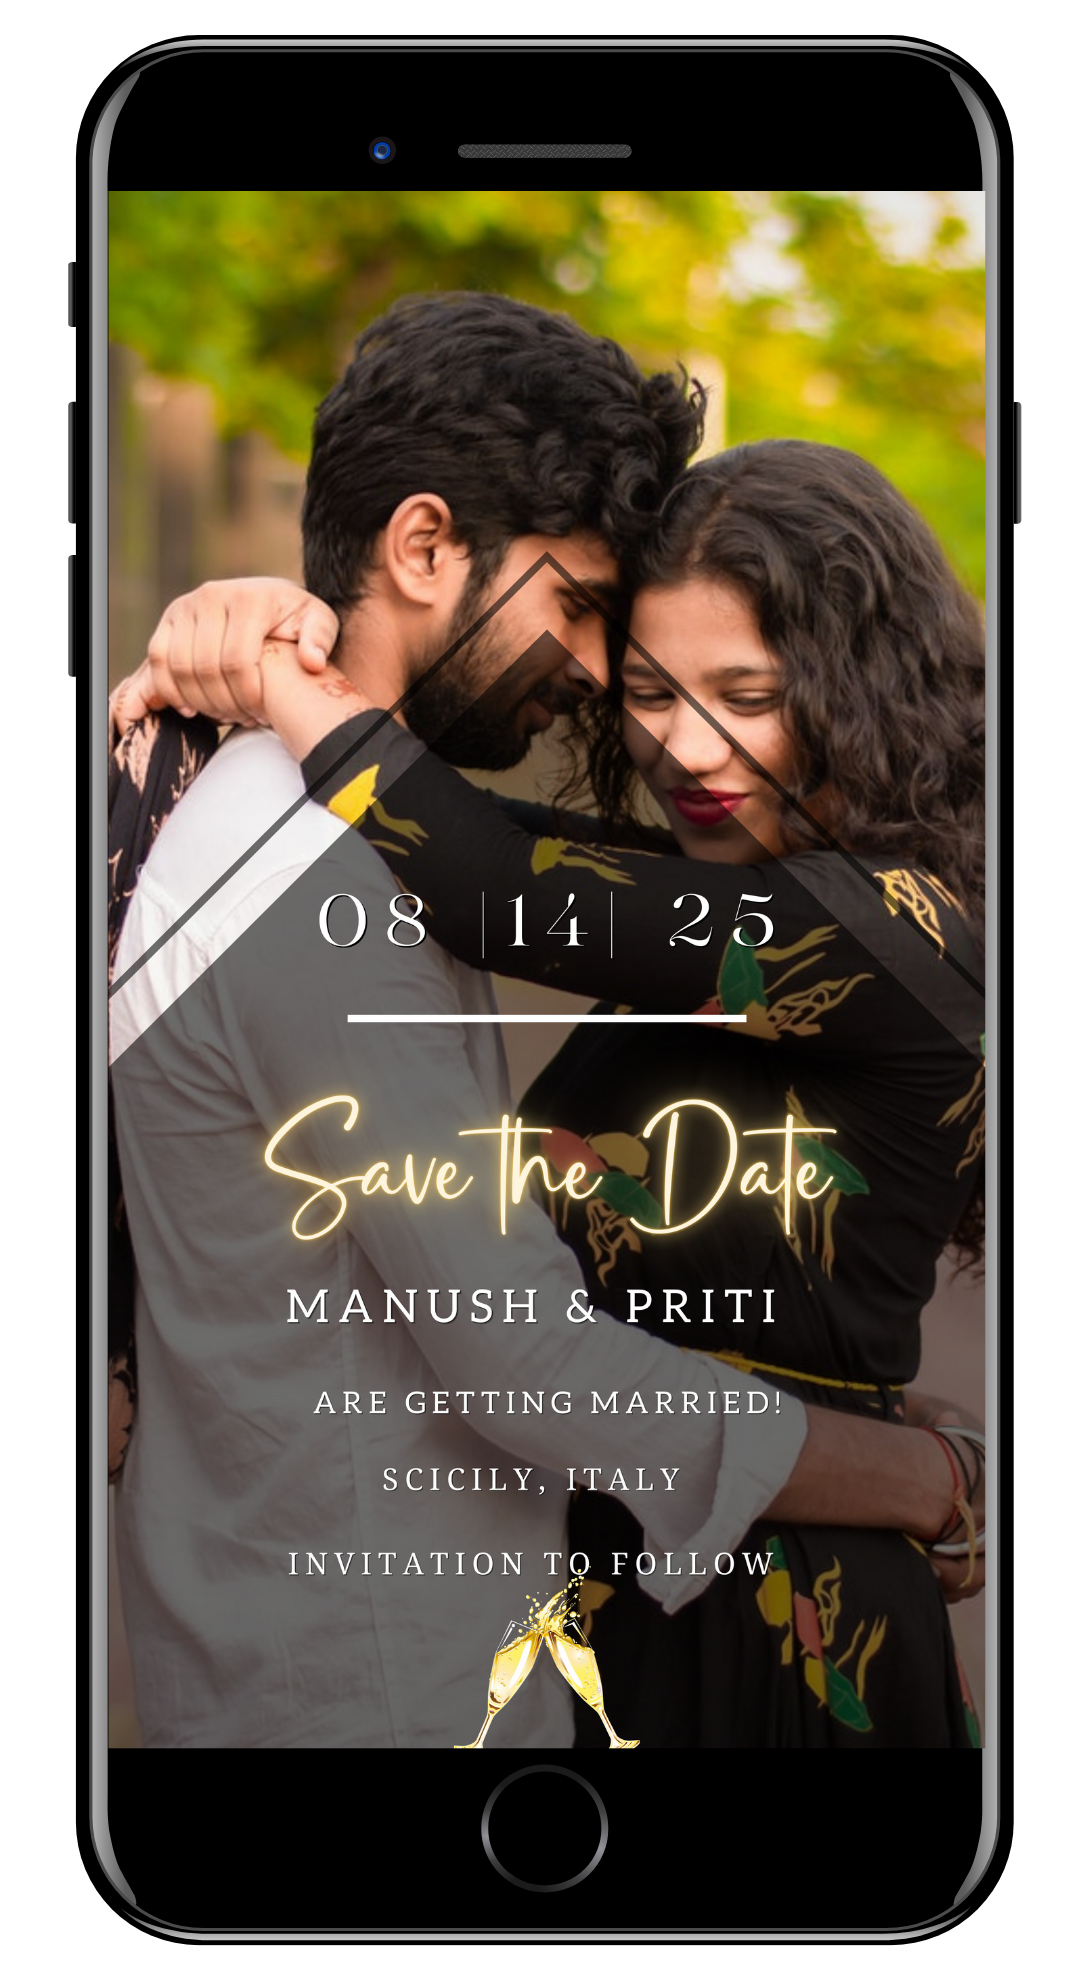 Man and woman hugging, showcasing Editable Gold Neon Photo Save The Date Wedding Evite, customizable via Canva for easy digital sharing.